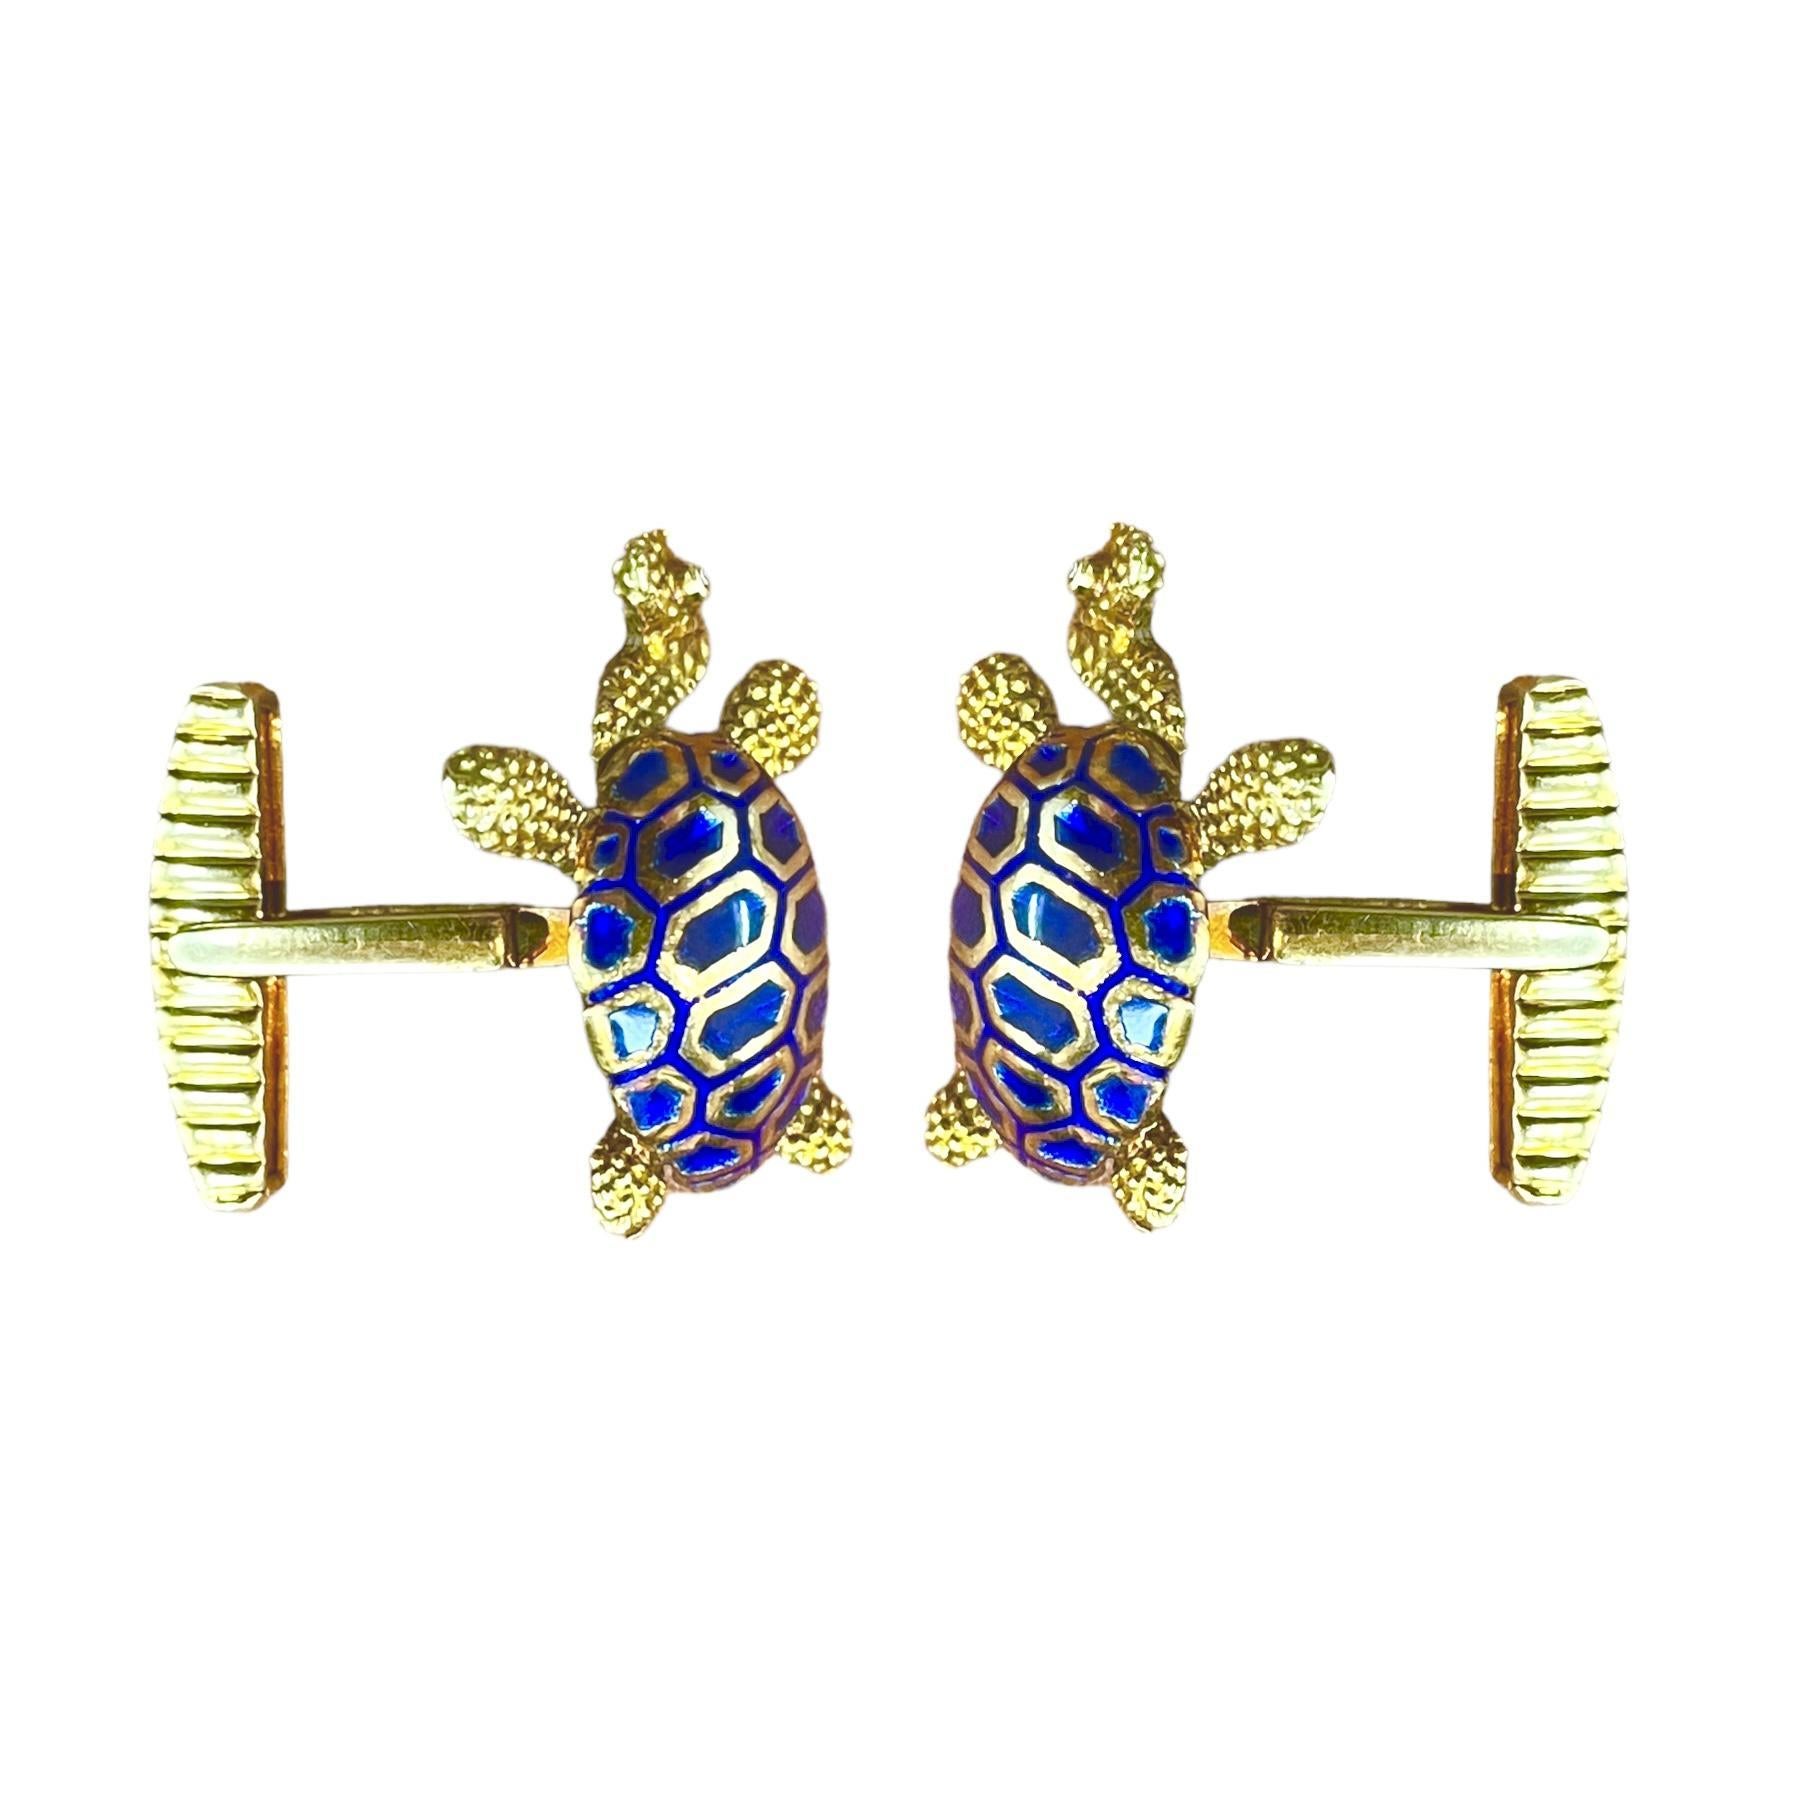 Elevate your style with these exquisite blue enamel turtle cufflinks featuring dazzling diamond eyes, set in 14K yellow gold. These meticulously crafted cufflinks are the epitome of sophistication and charm, making them the perfect accessory for any